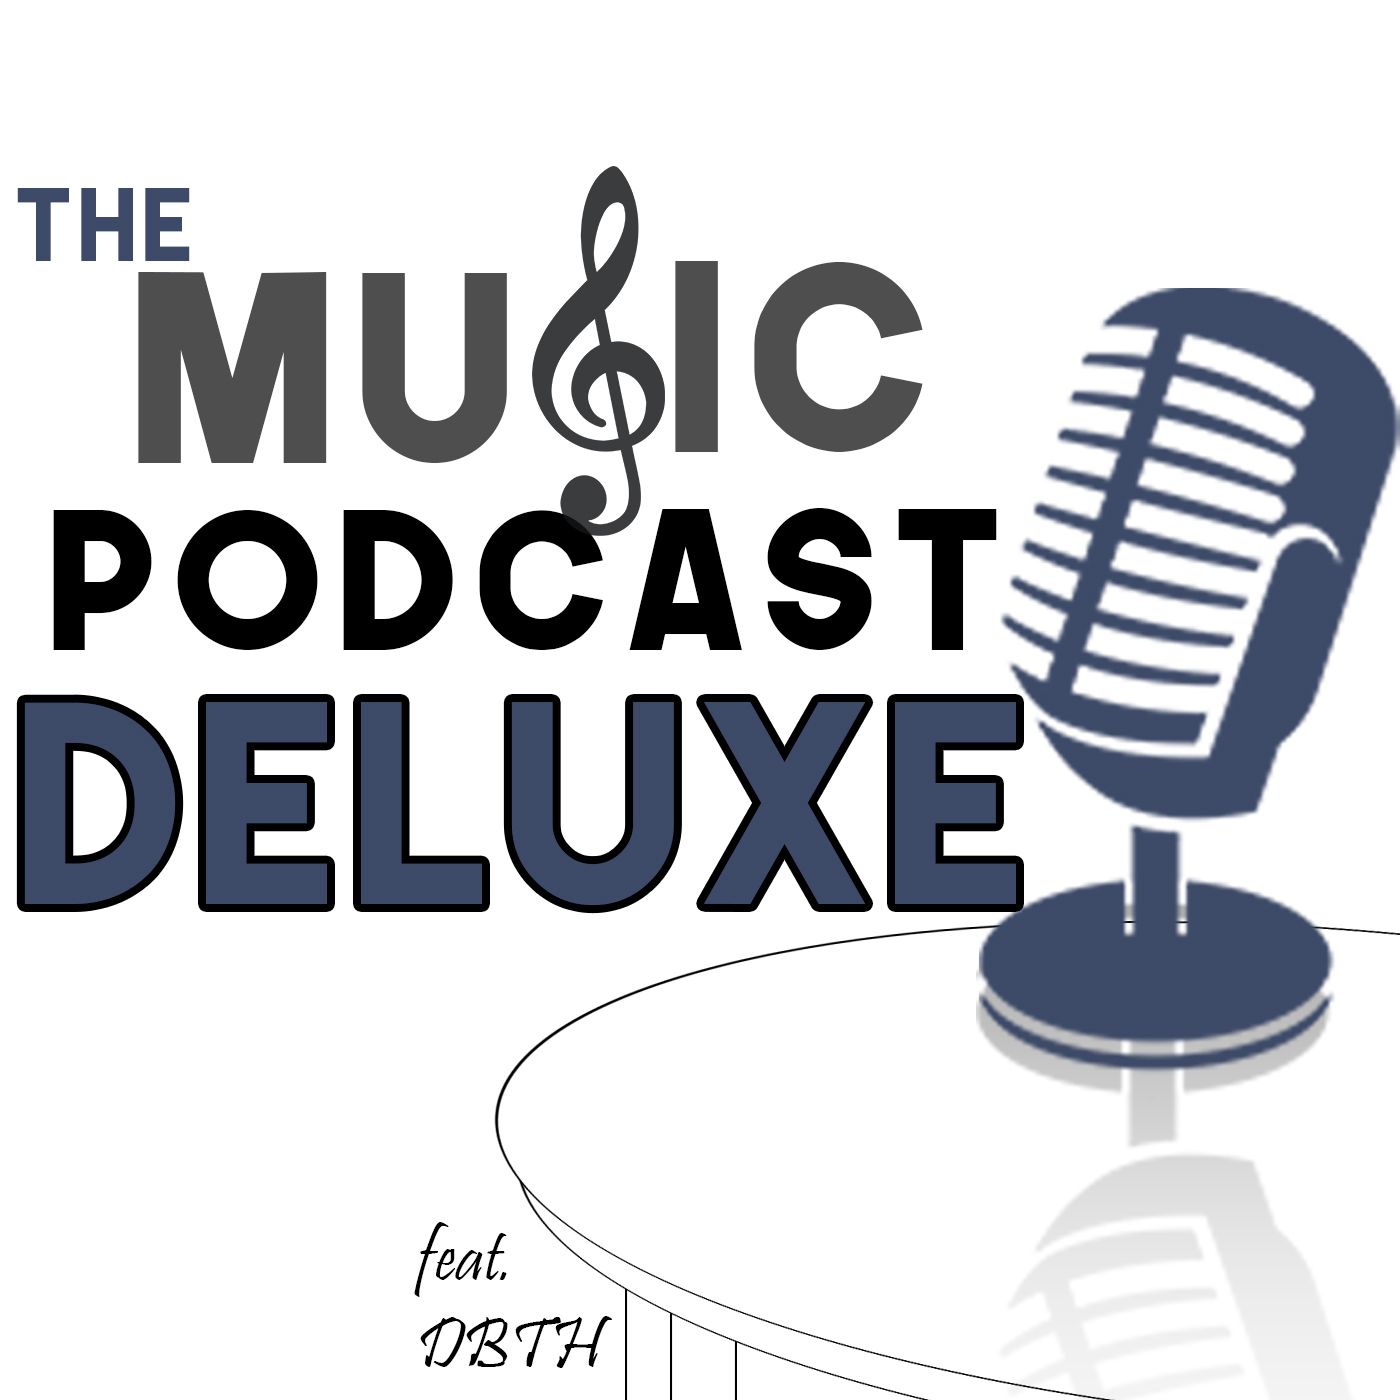 The Music Podcast Deluxe